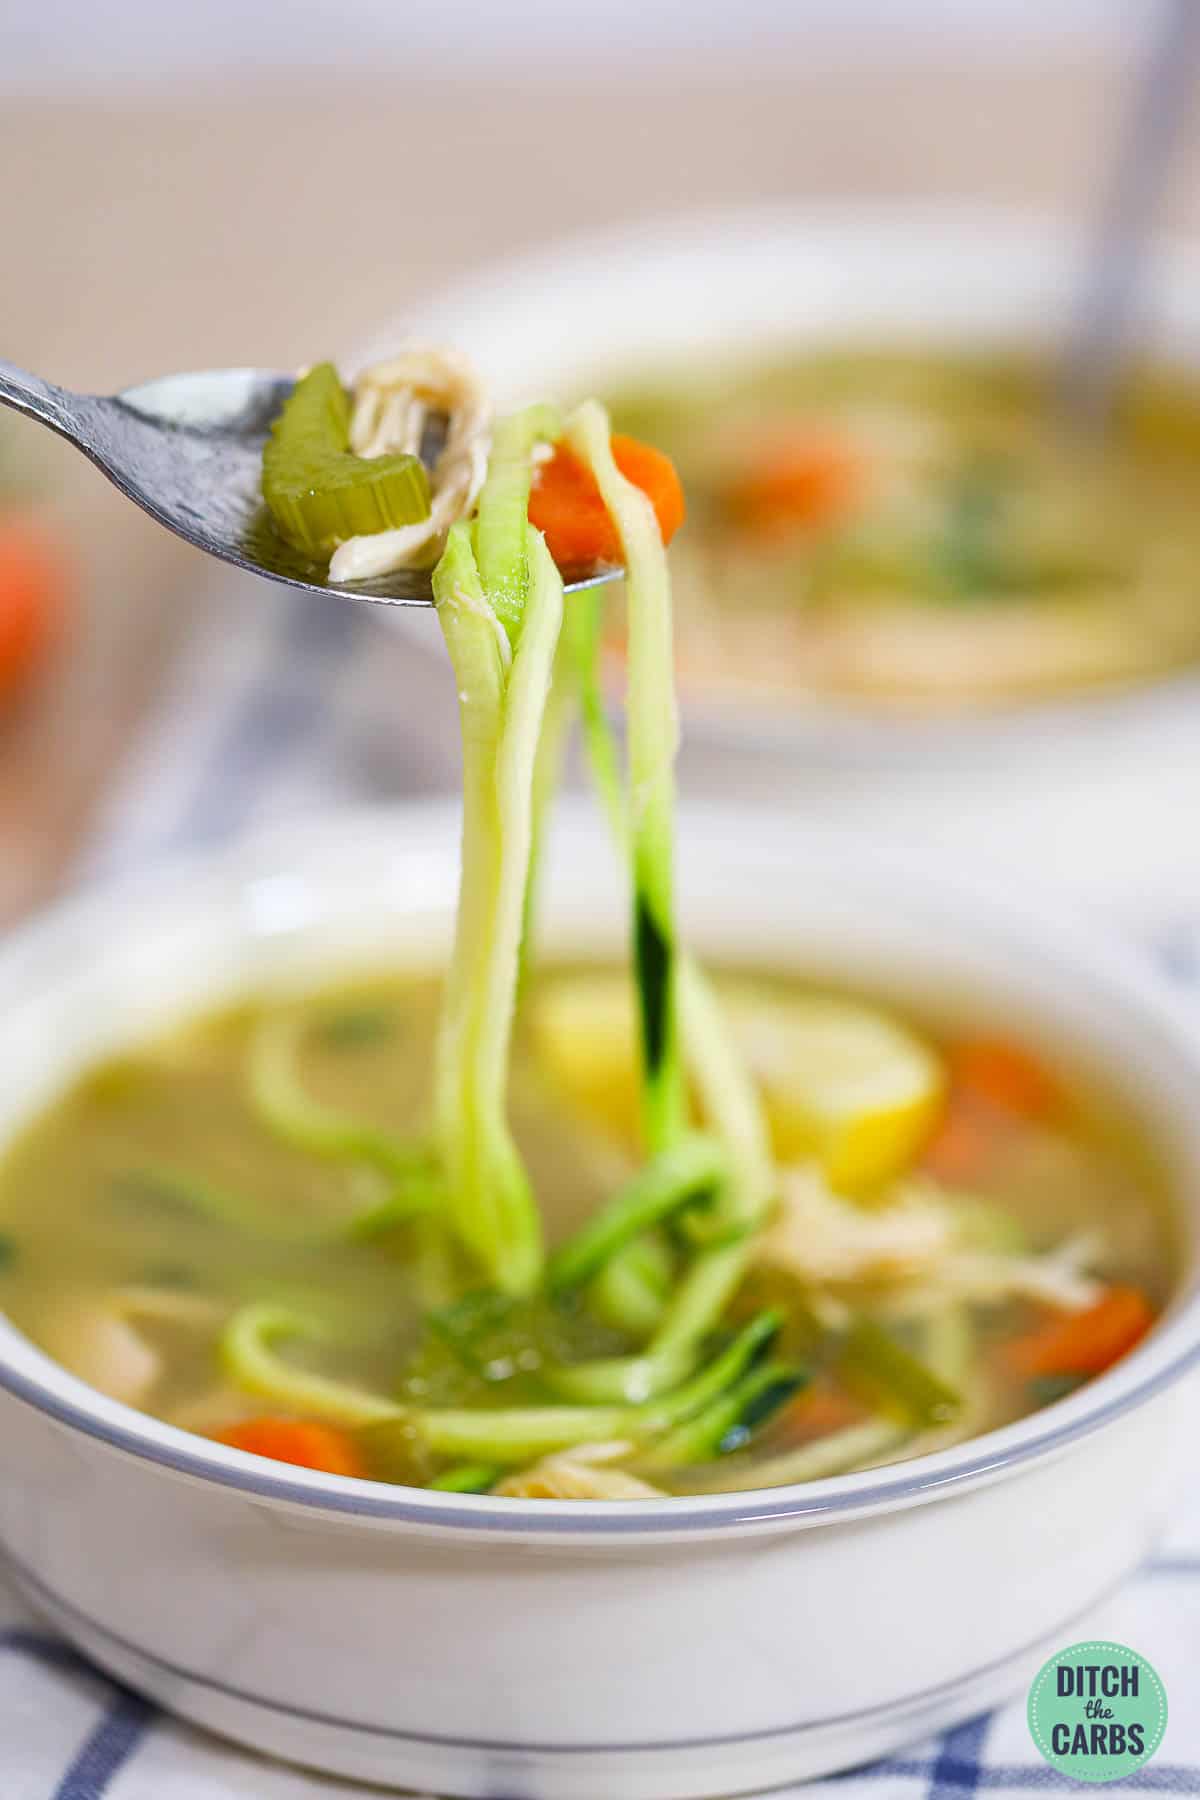 a spoon lifting a bite of veggies from soupy broth